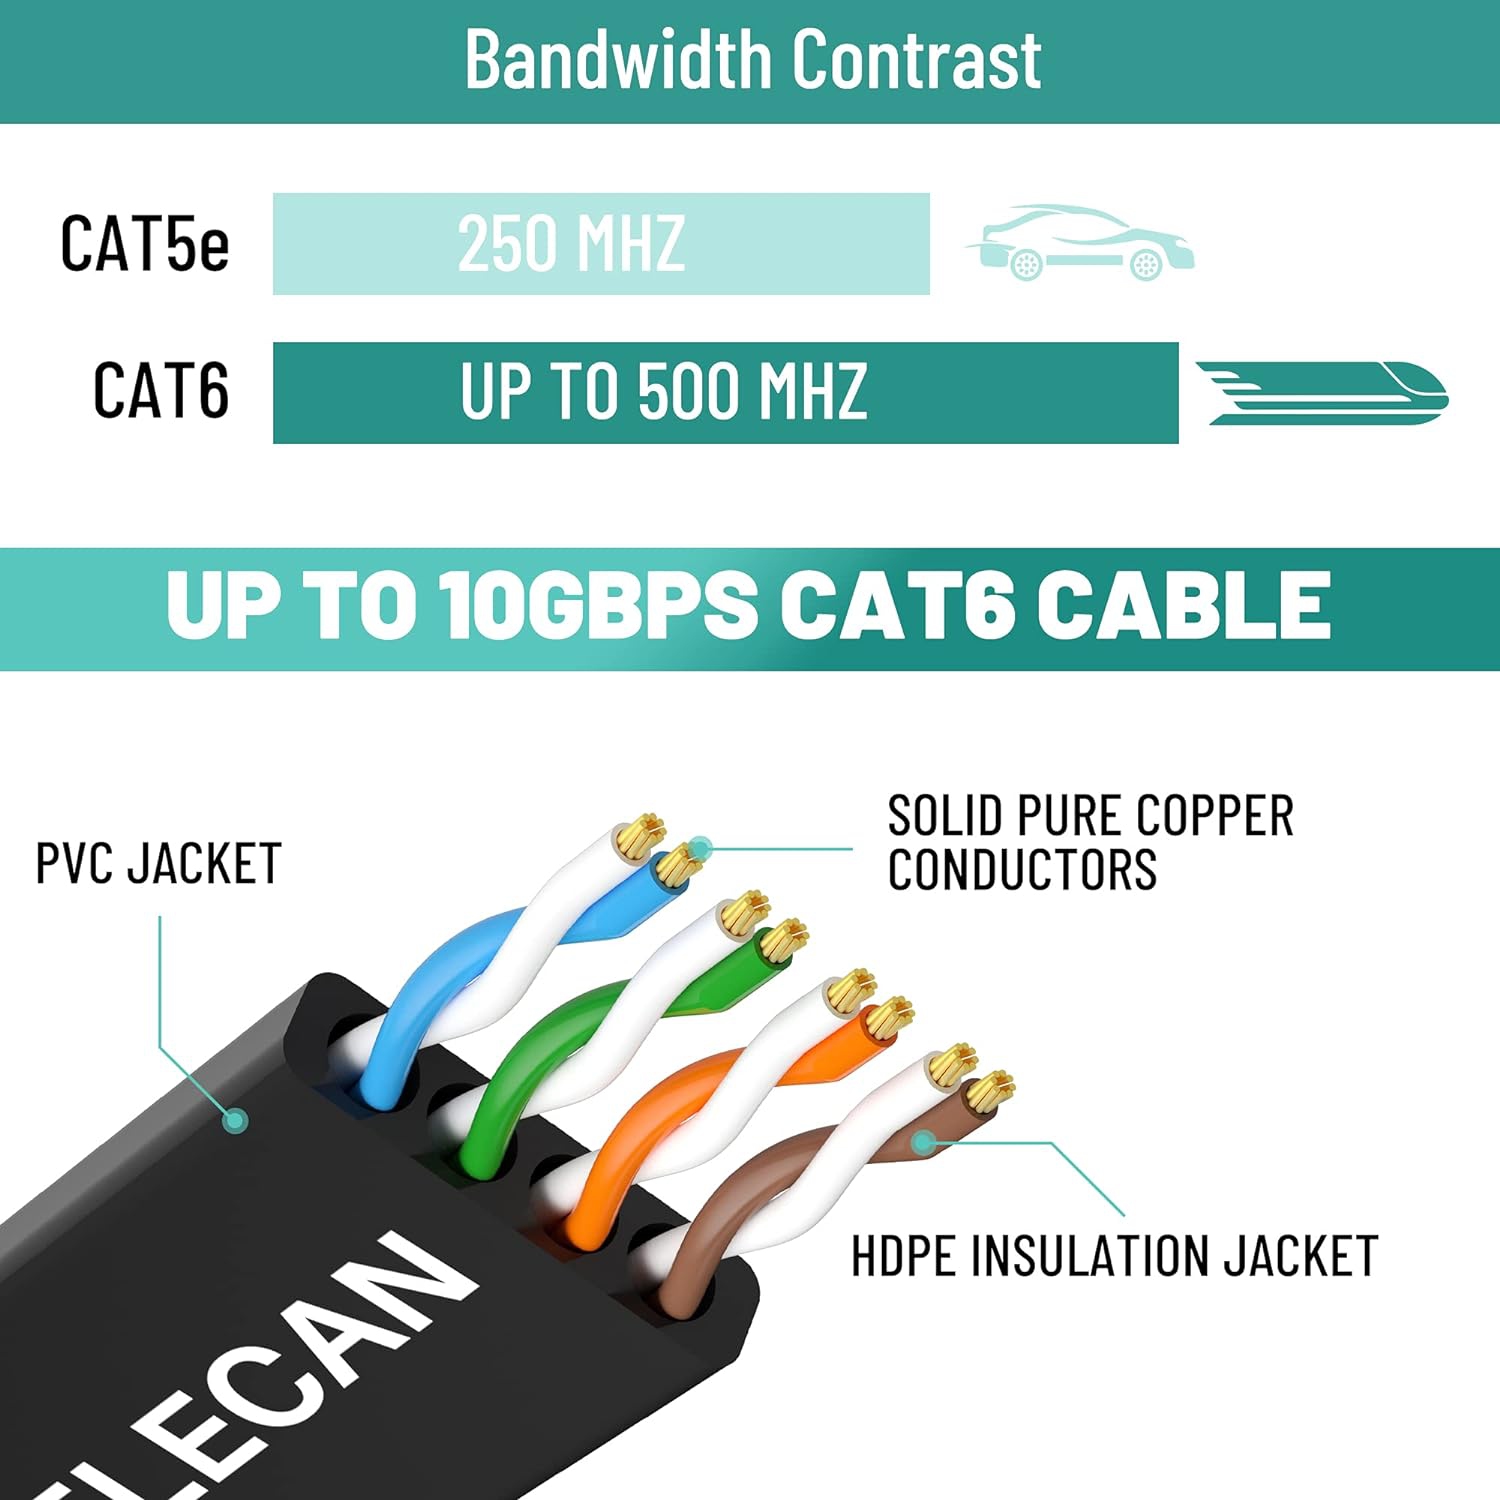 White Flat CAT6 Cable - Pure Copper Network Cable